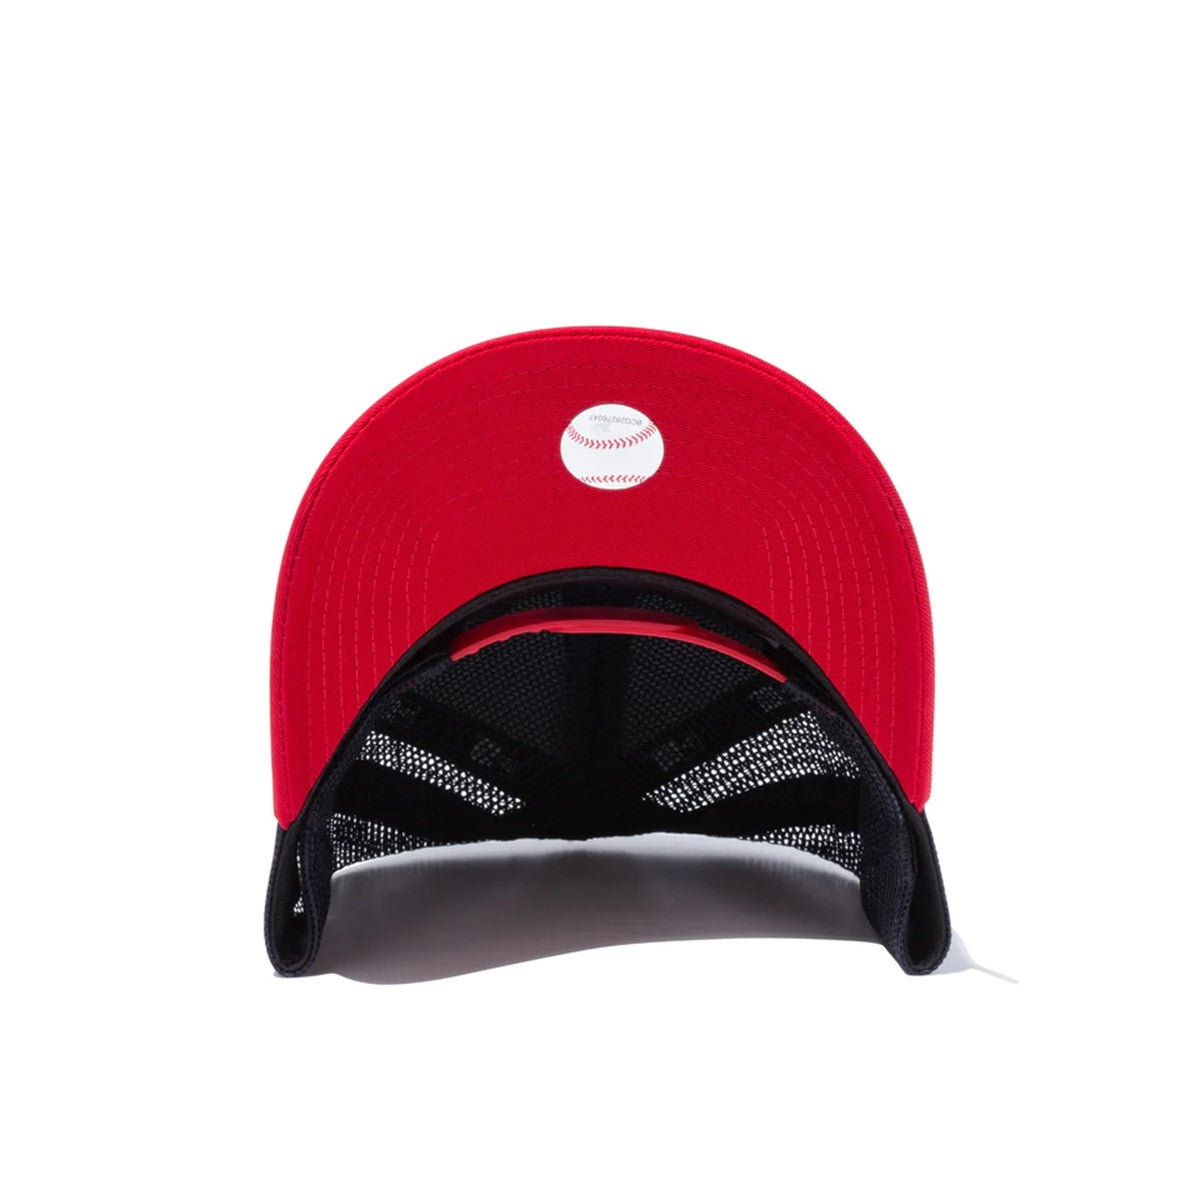 NEW ERA Los Angeles Angels - 9FORTY A-Frame Trucker LOSANG NVY SCA TEAM【12746920】